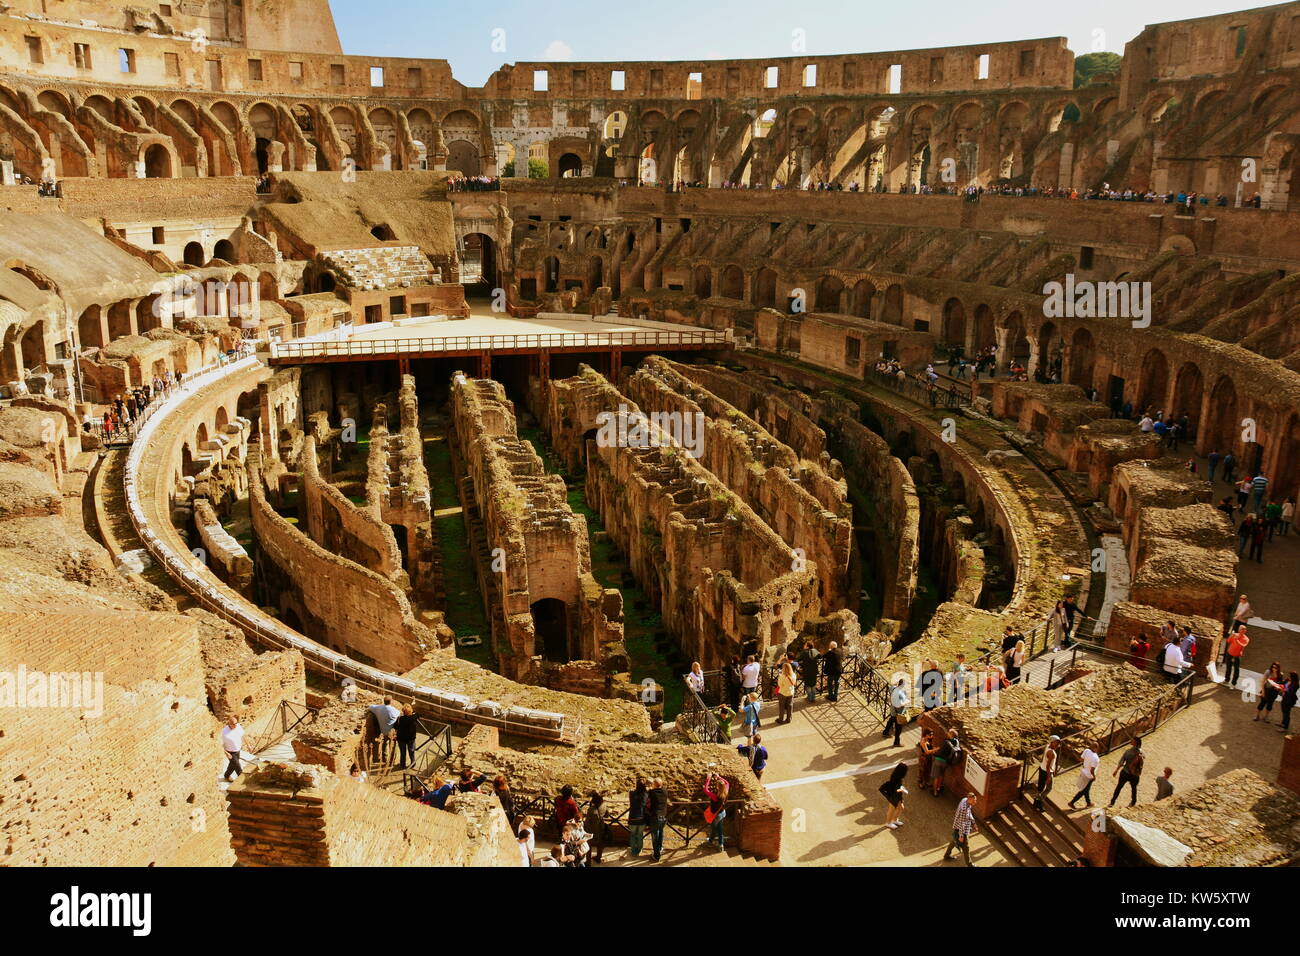 The interior of one of the wonders of the world the Roman Colosseum in Rome Italy. Stock Photo